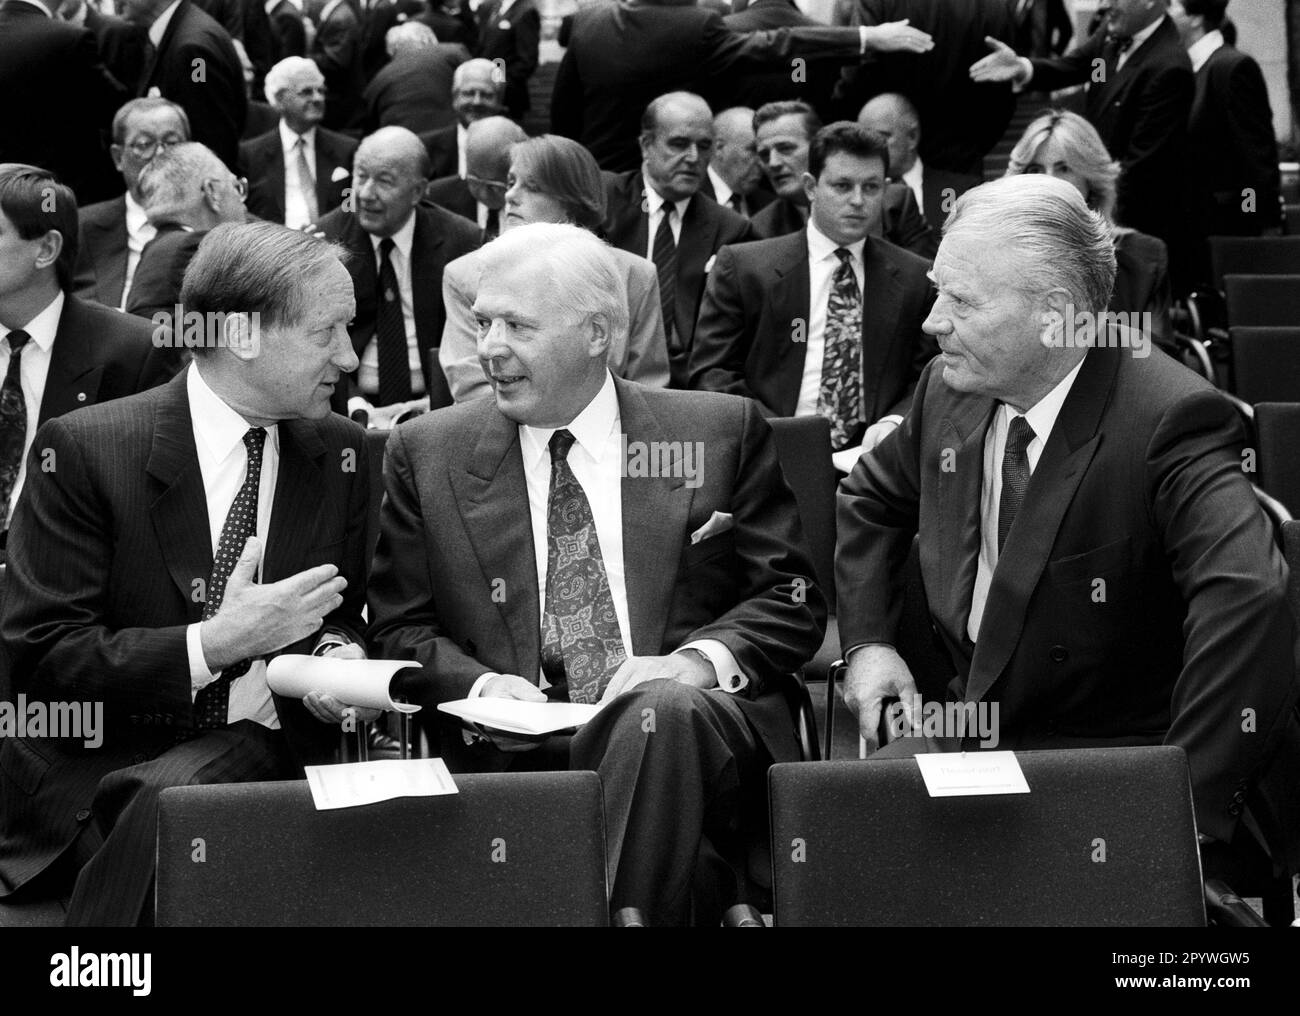 Eberhard von KUENHEIM ( BMW AG ) , Friedhelm GIESKE ( RWE AG ) and Walter SEIPP ( Commerzbank AG ) , May 1993 [automated translation] Stock Photo